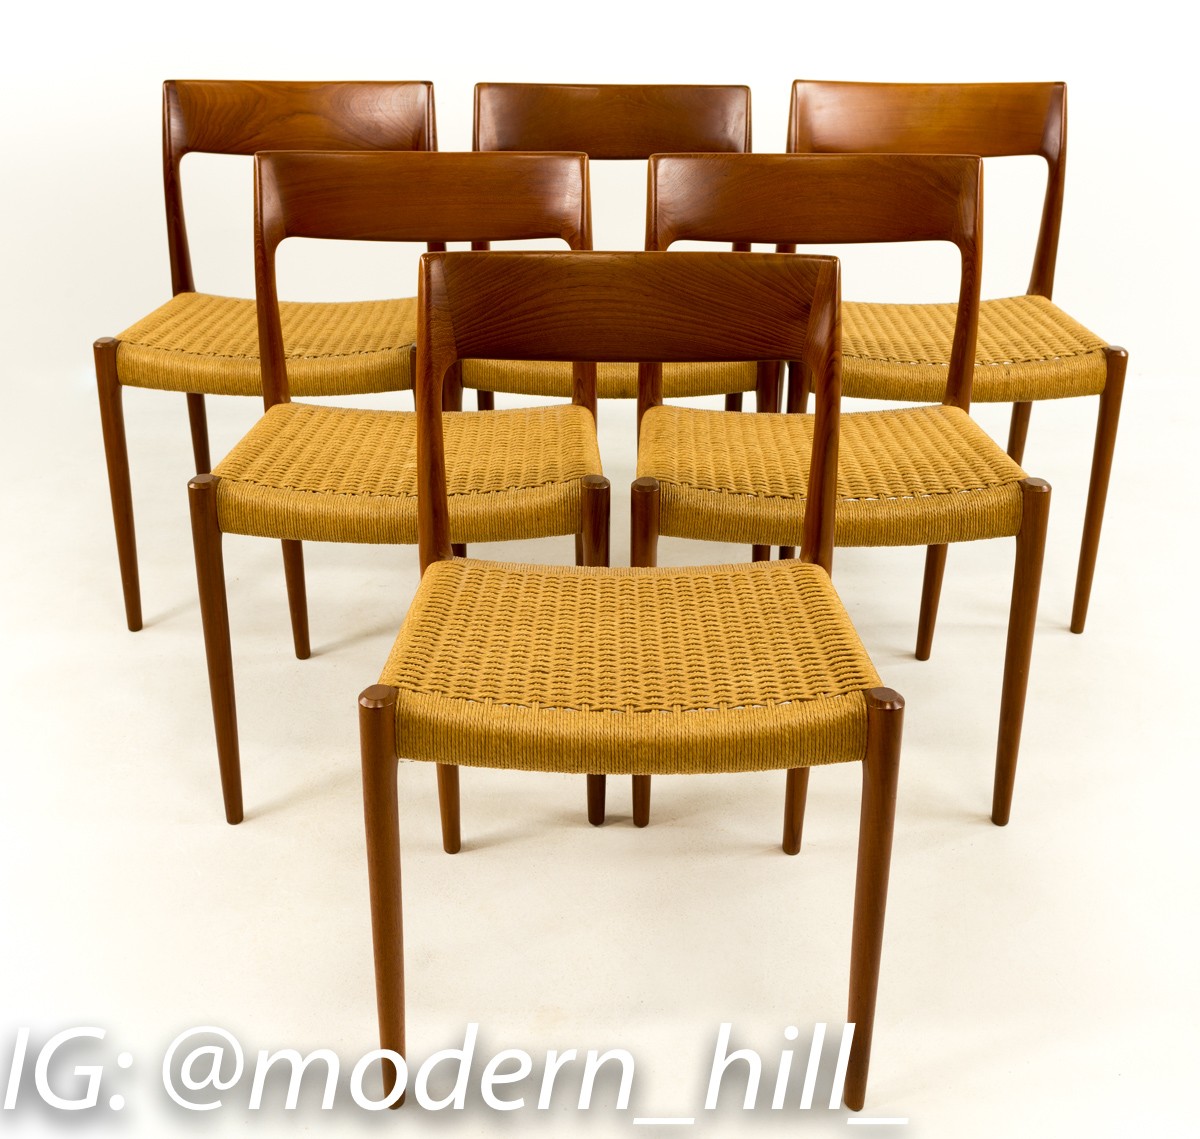 Niels Moller No 77 Caned Dining Chair Set of 6